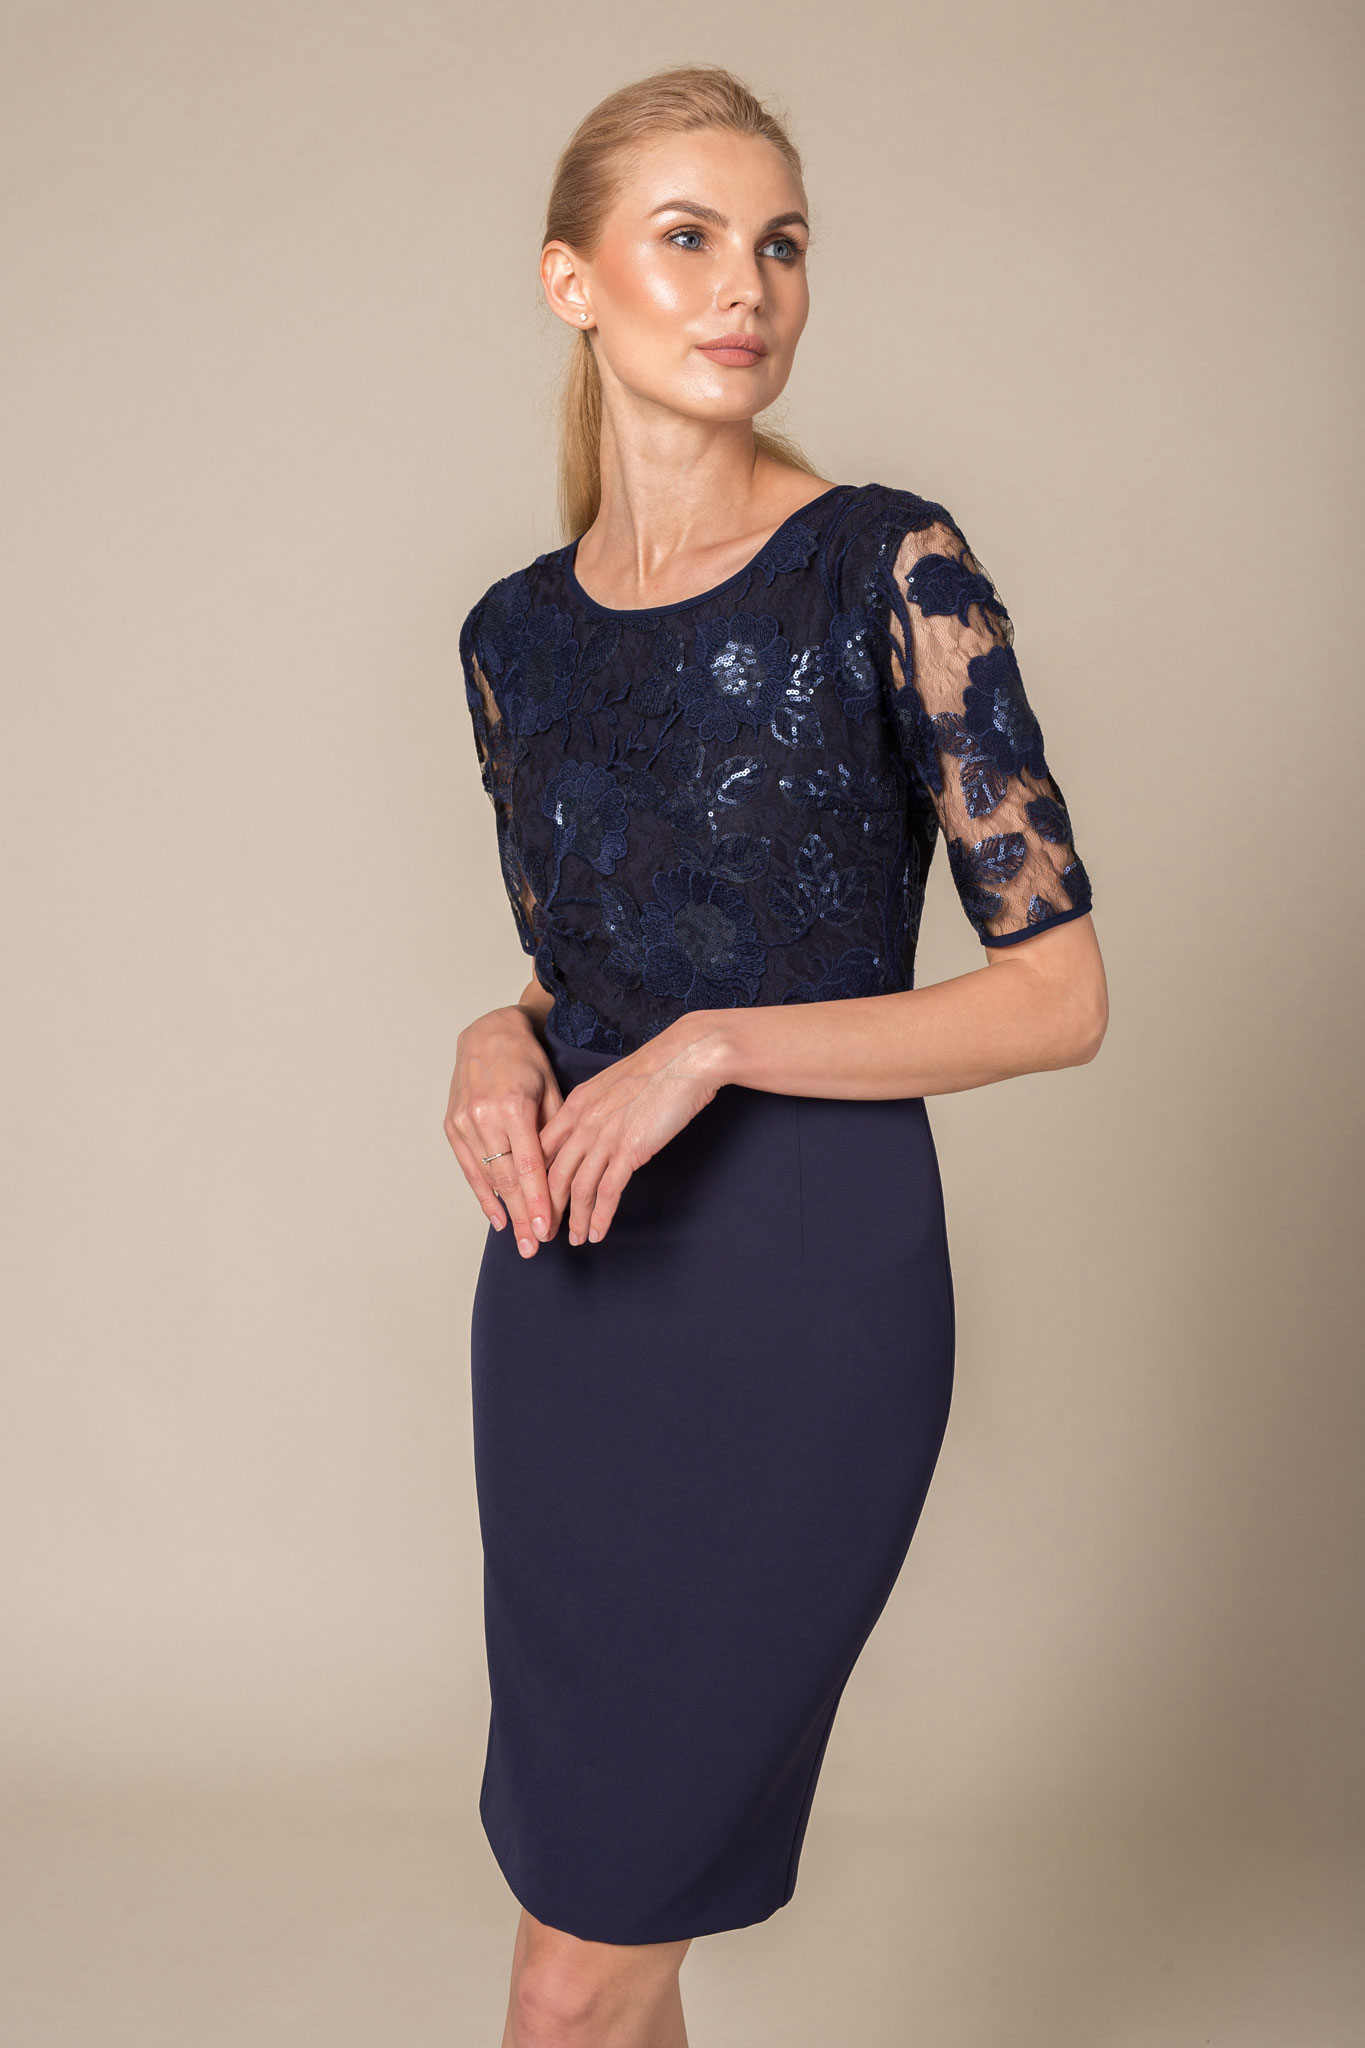 Navy bodycon dress with sequin lace top and 3 quarter sleeves - Le Parole